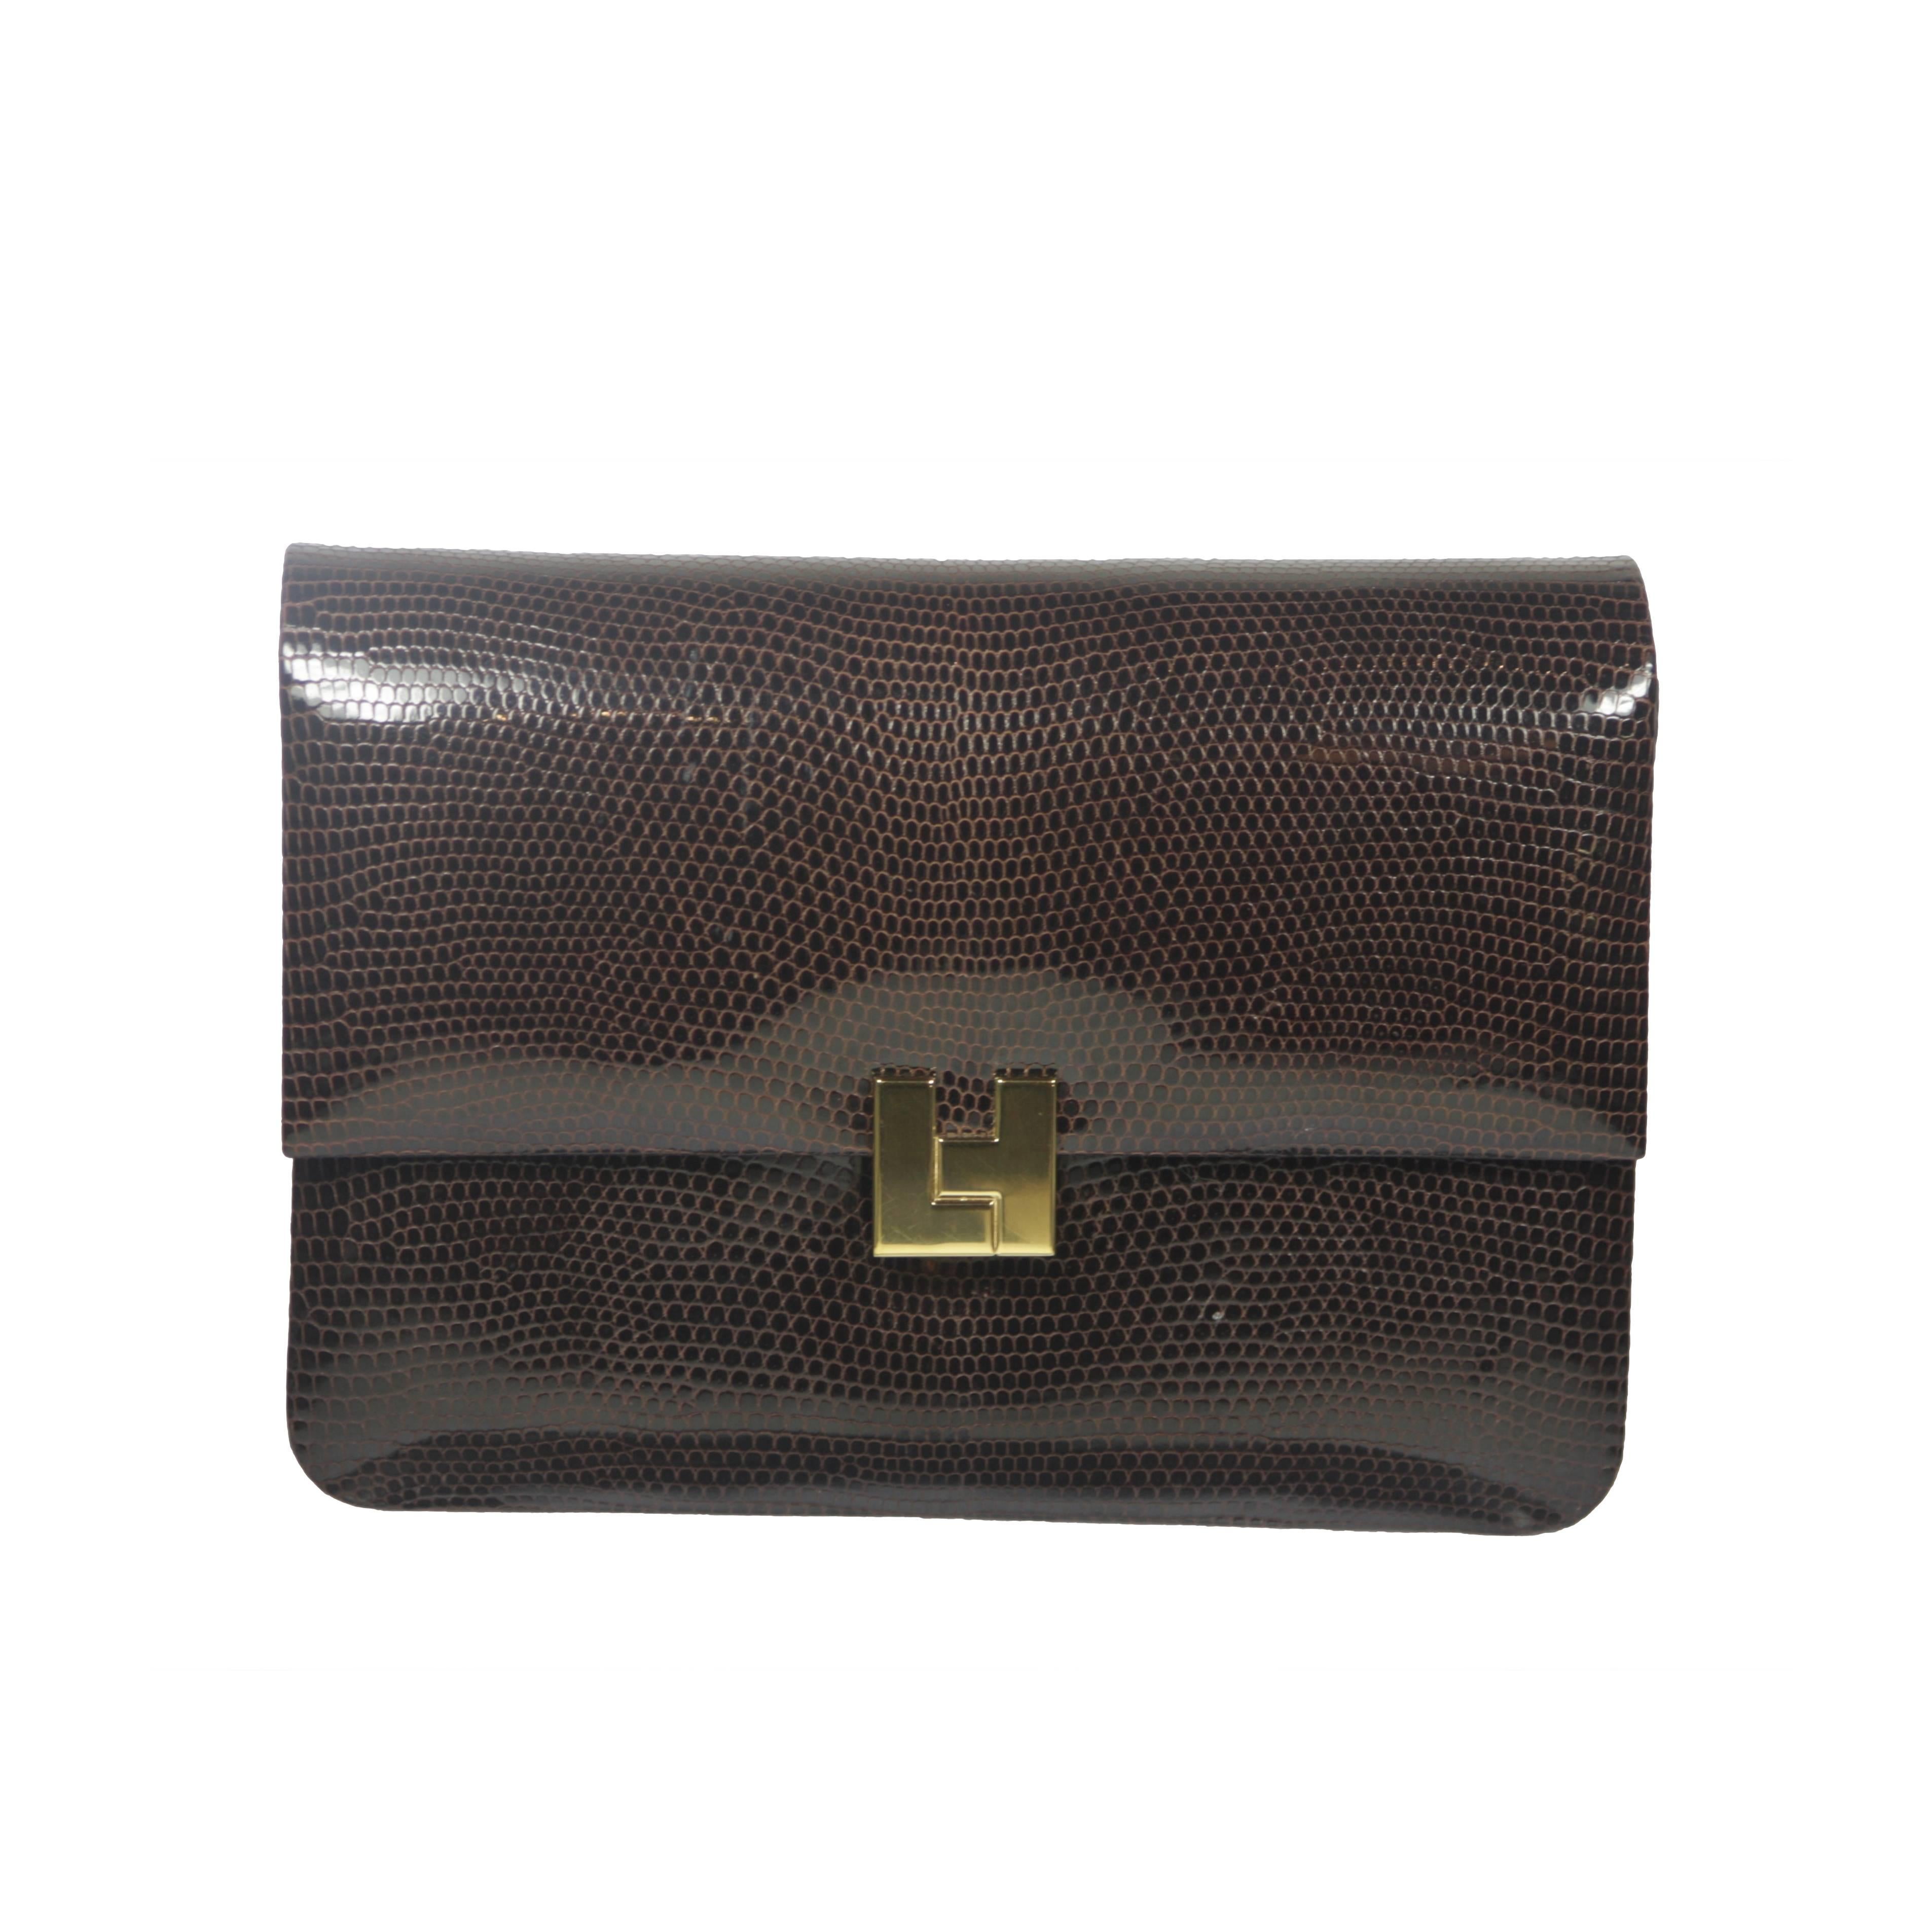 LAMBERTSON TRUEX Brown Lizard Clutch with Gold Hardware and Optional Strap